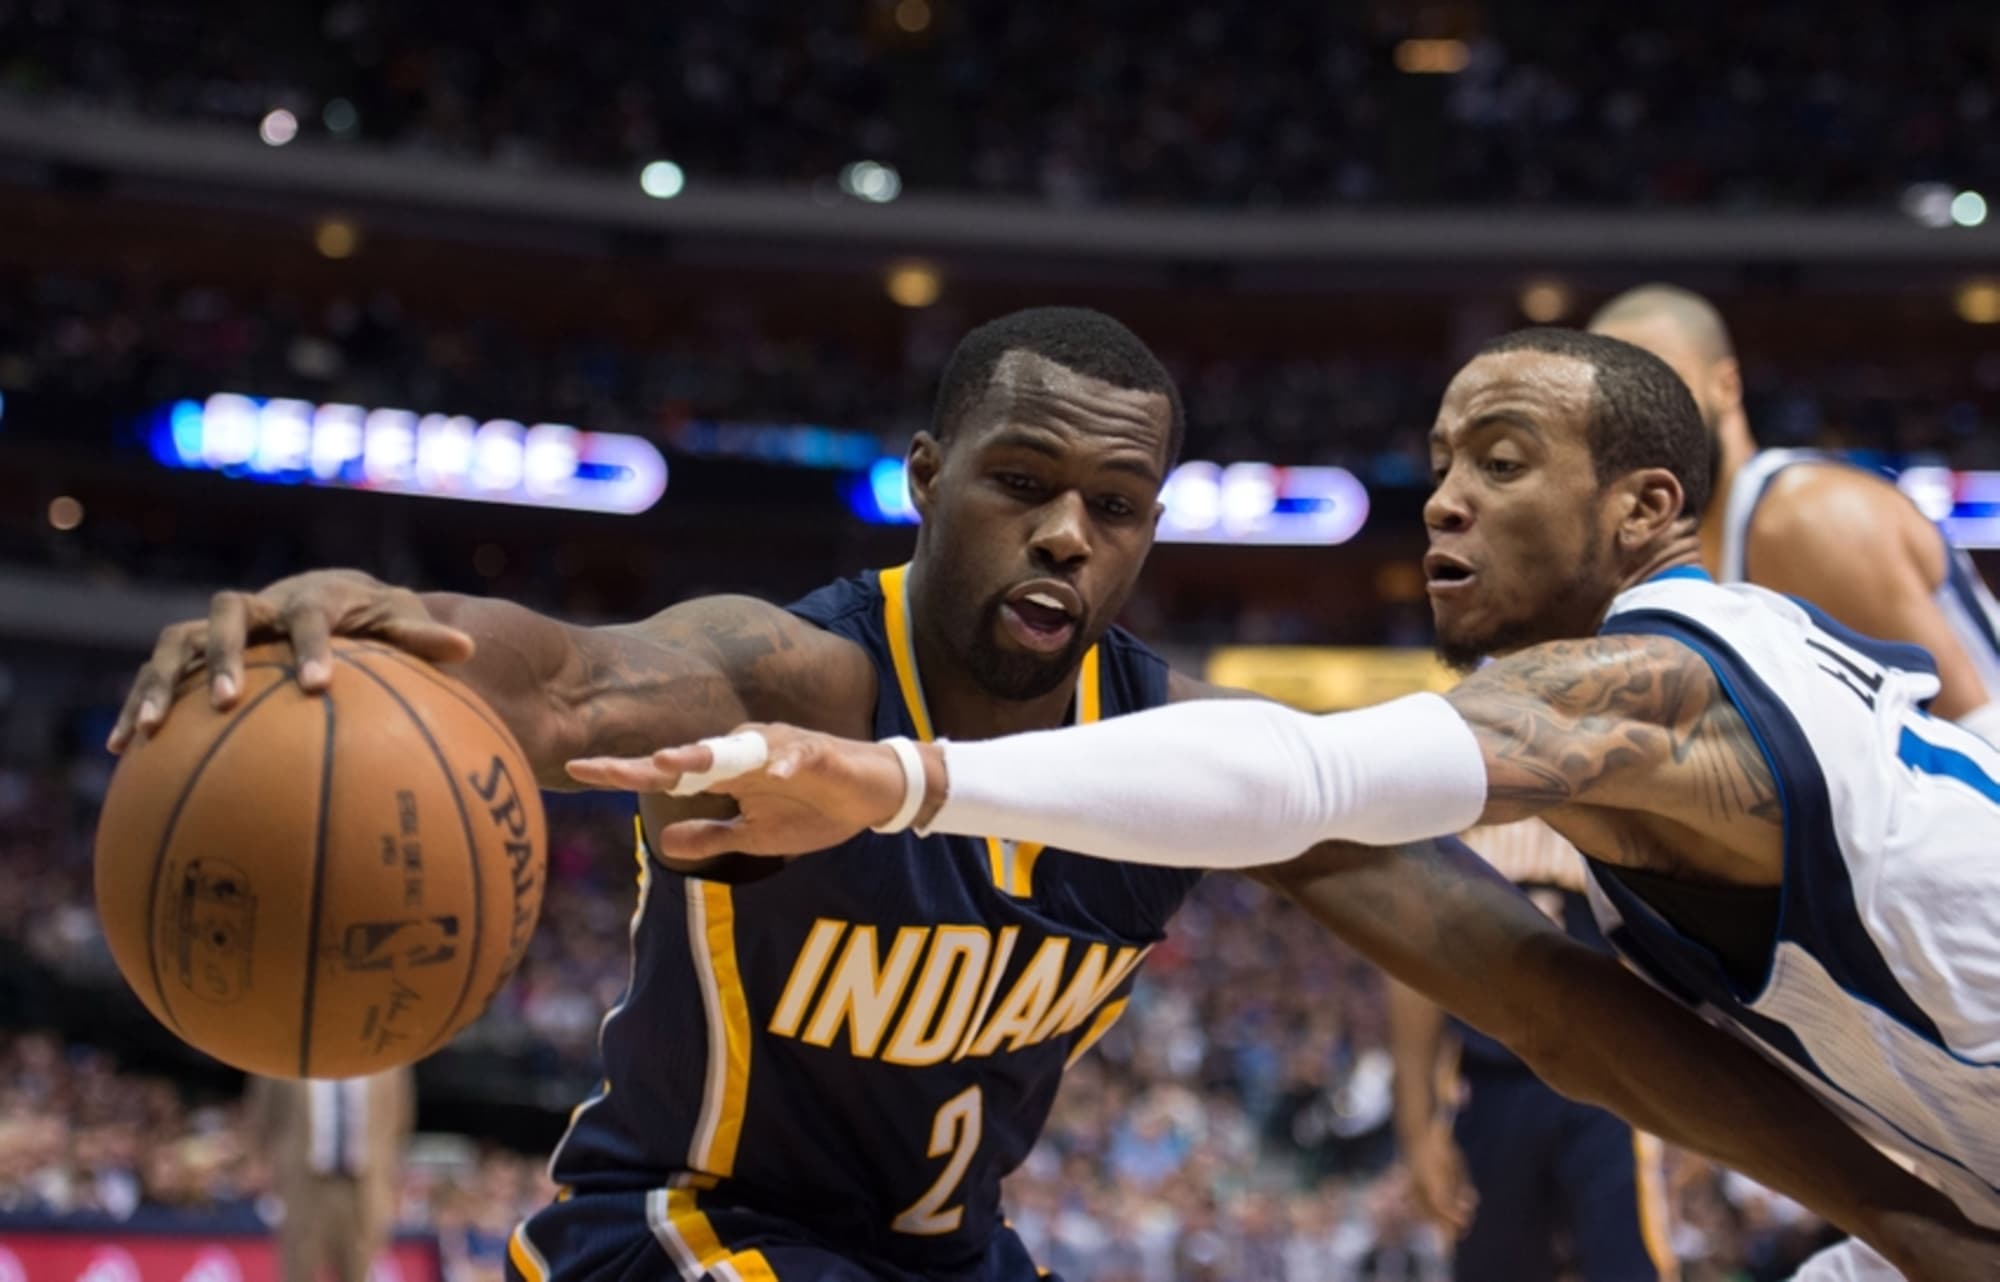 indiana pacers depth